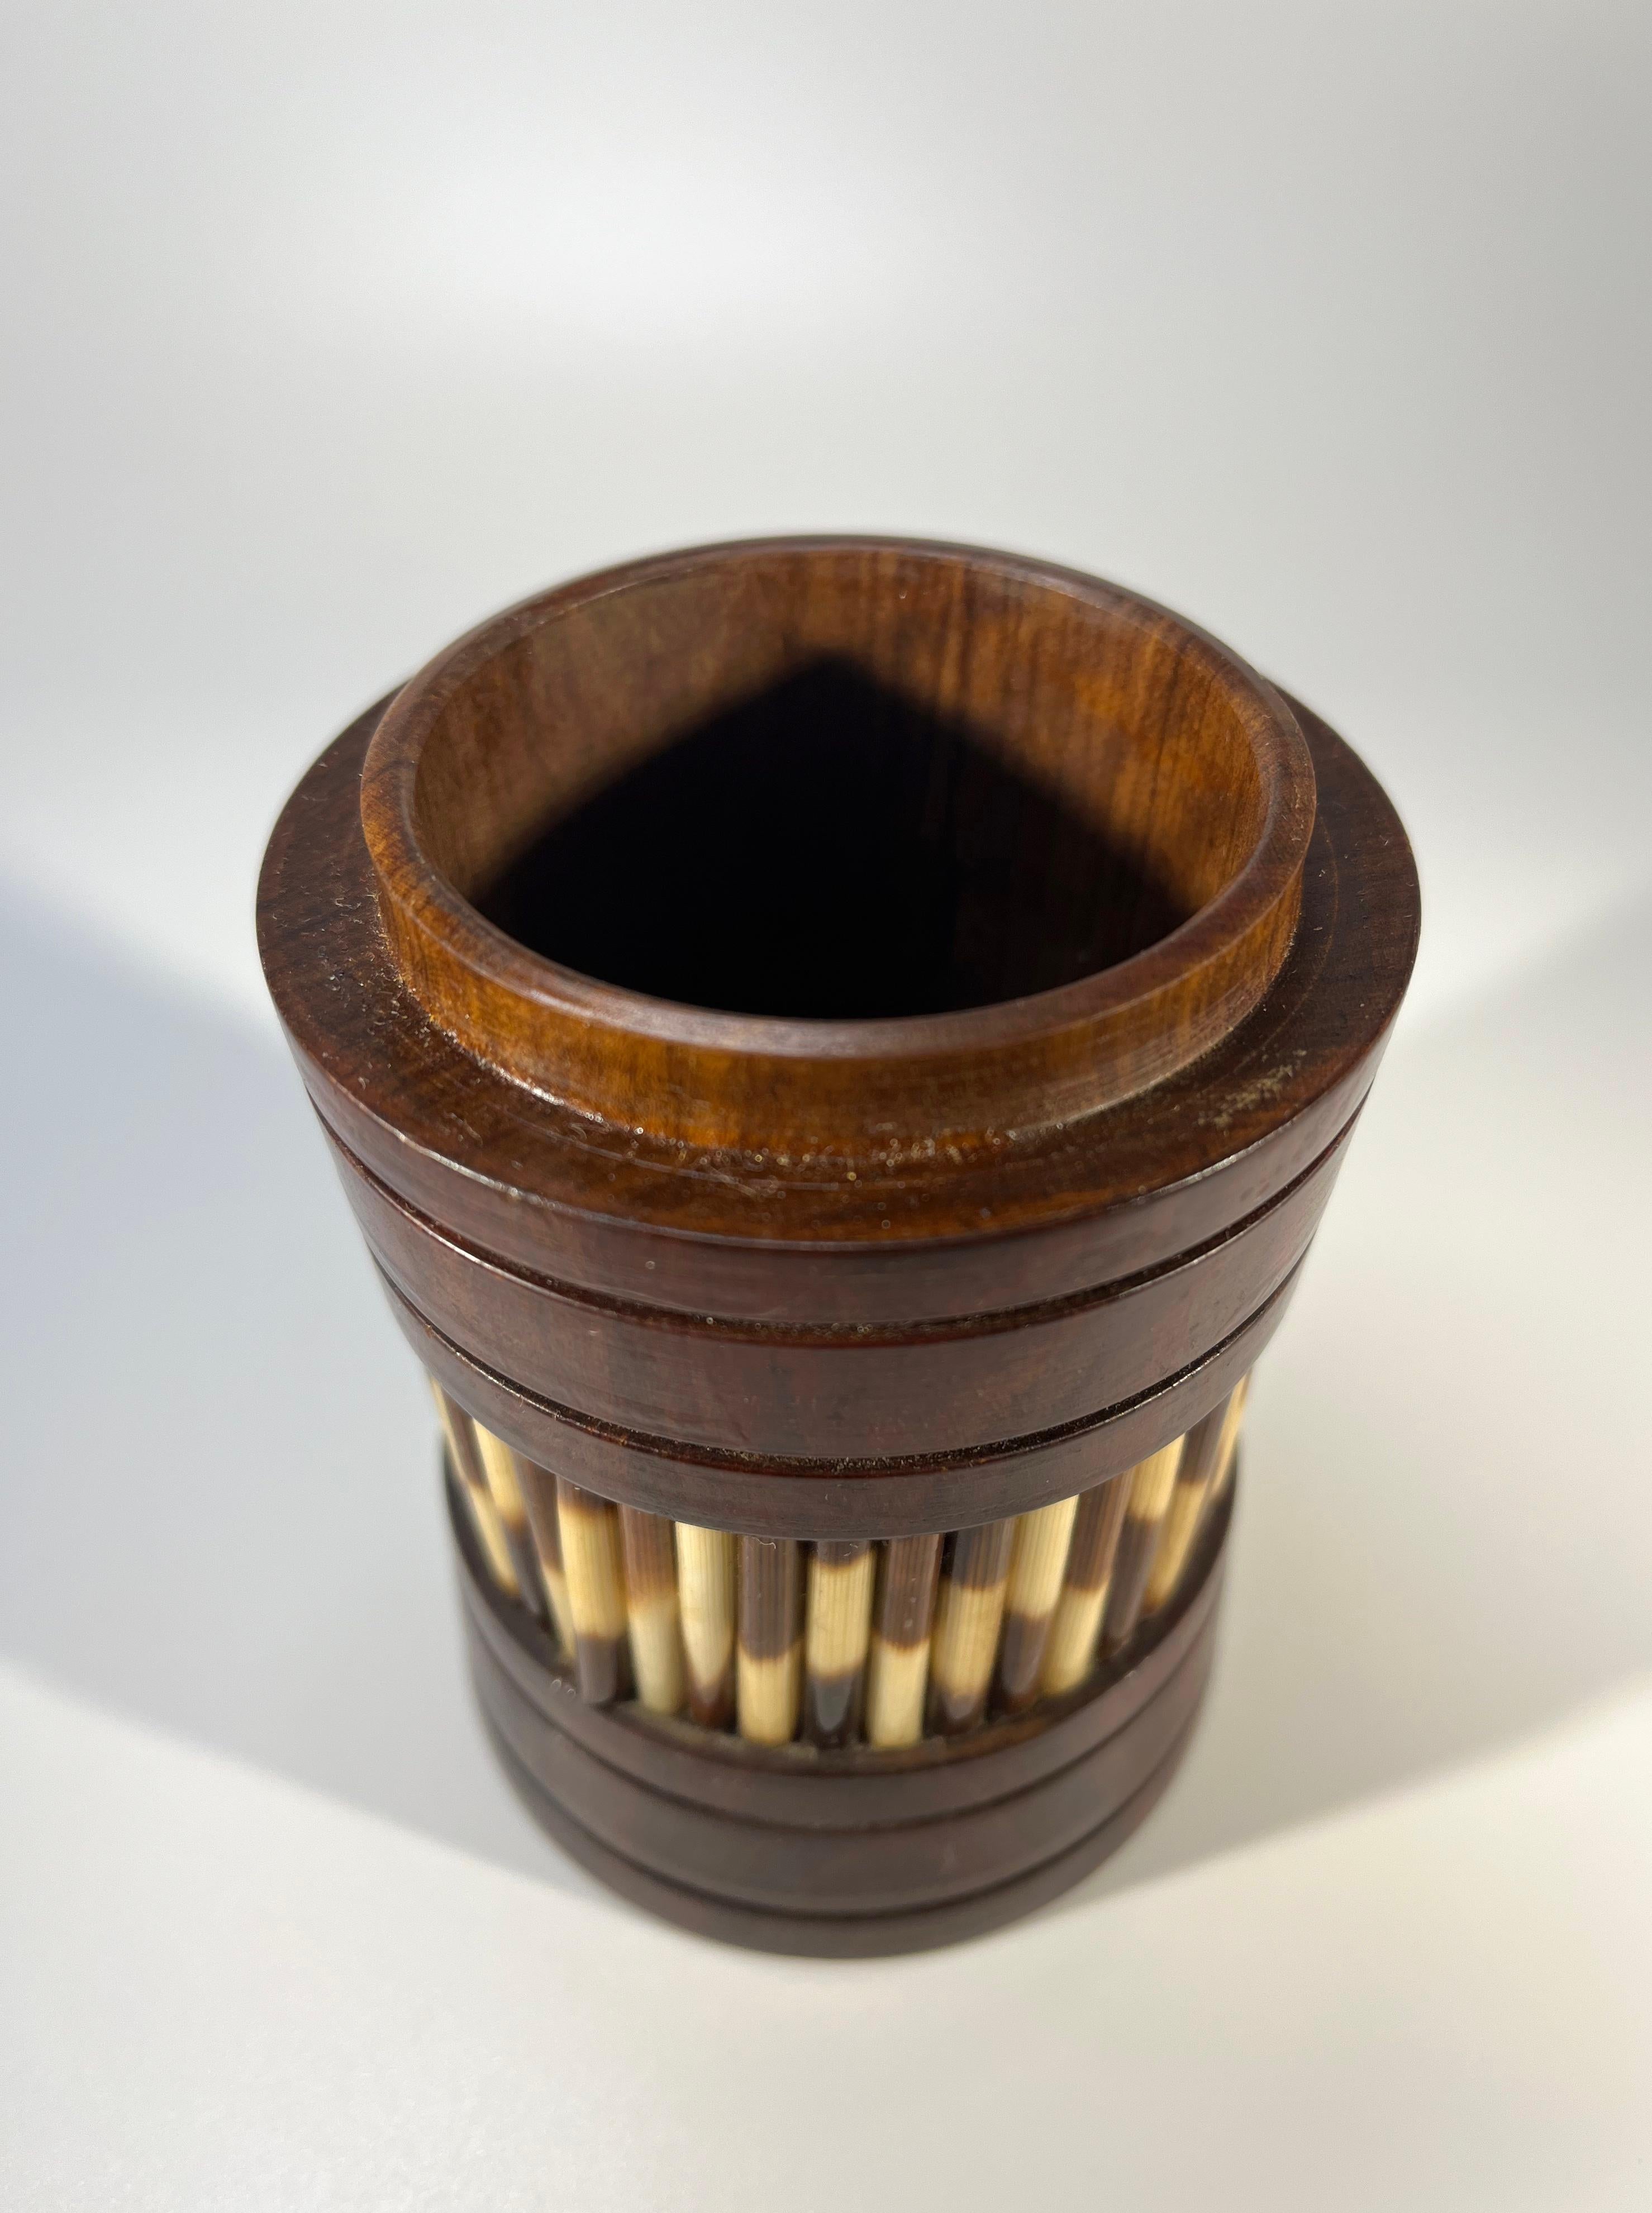 Beautifully Styled Ceylonese Porcupine Quill, Lidded Dark Wood Conical Pot In Good Condition For Sale In Rothley, Leicestershire